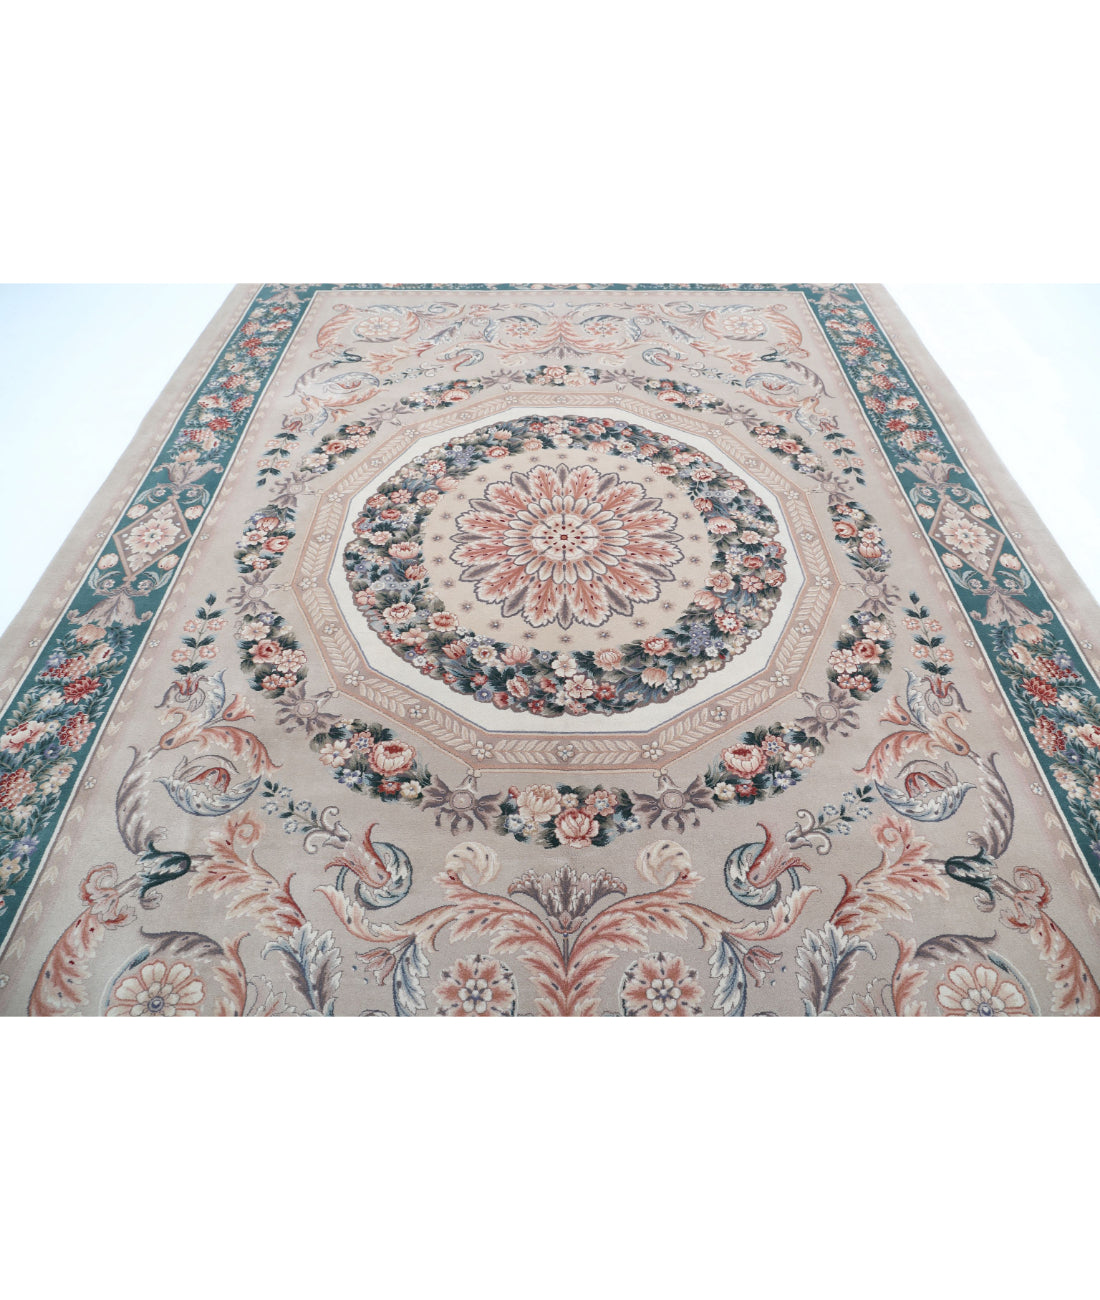 Hand Knotted Chinese Wool Rug - 8'11'' x 12'1'' 8'11'' x 12'1'' (175 X 300) / Brown / N/A